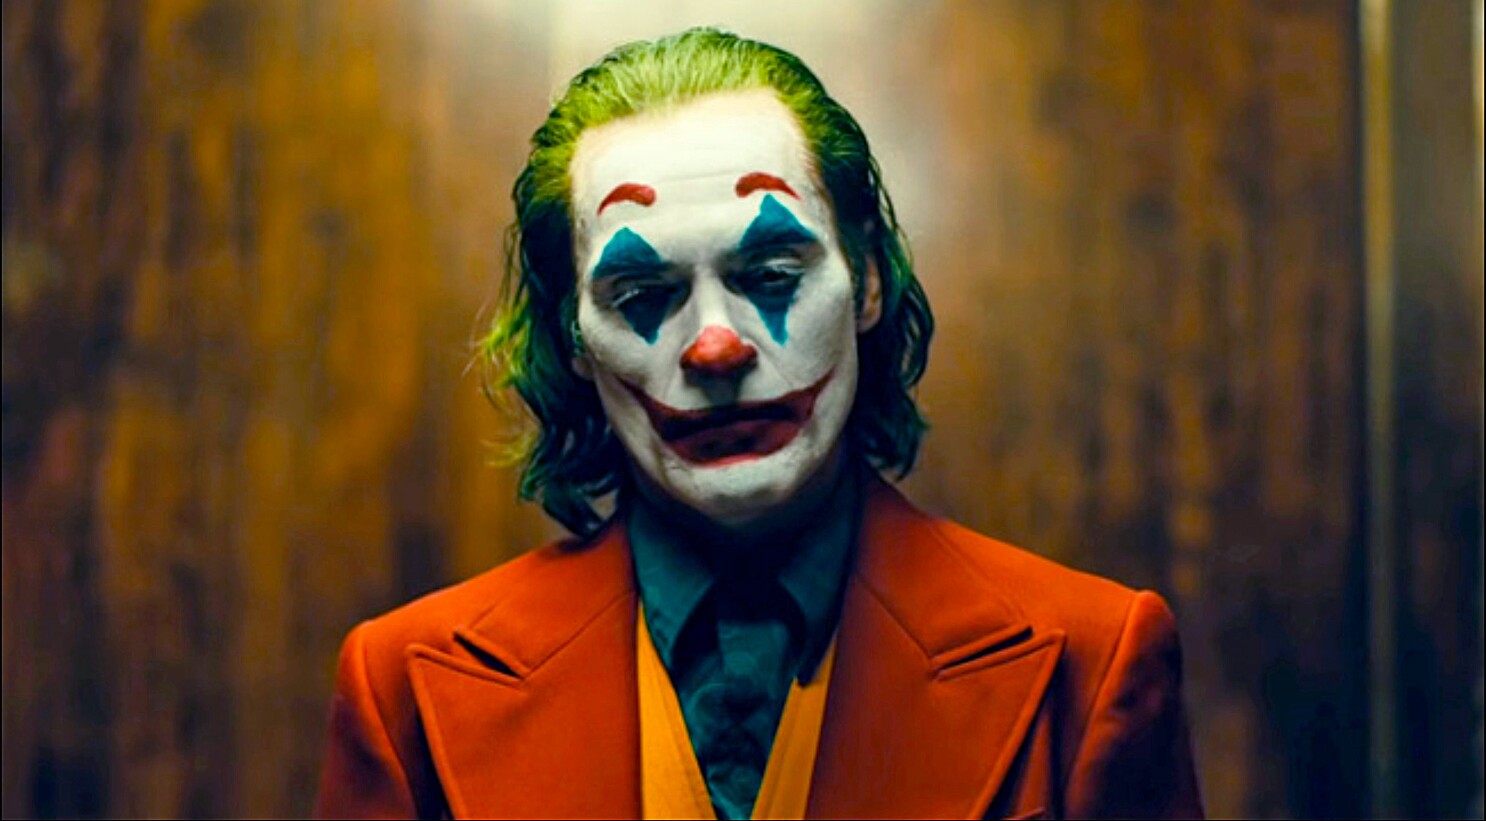 A Joker Sequel Joaquin Phoenix On The Potential For More Los Angeles Times